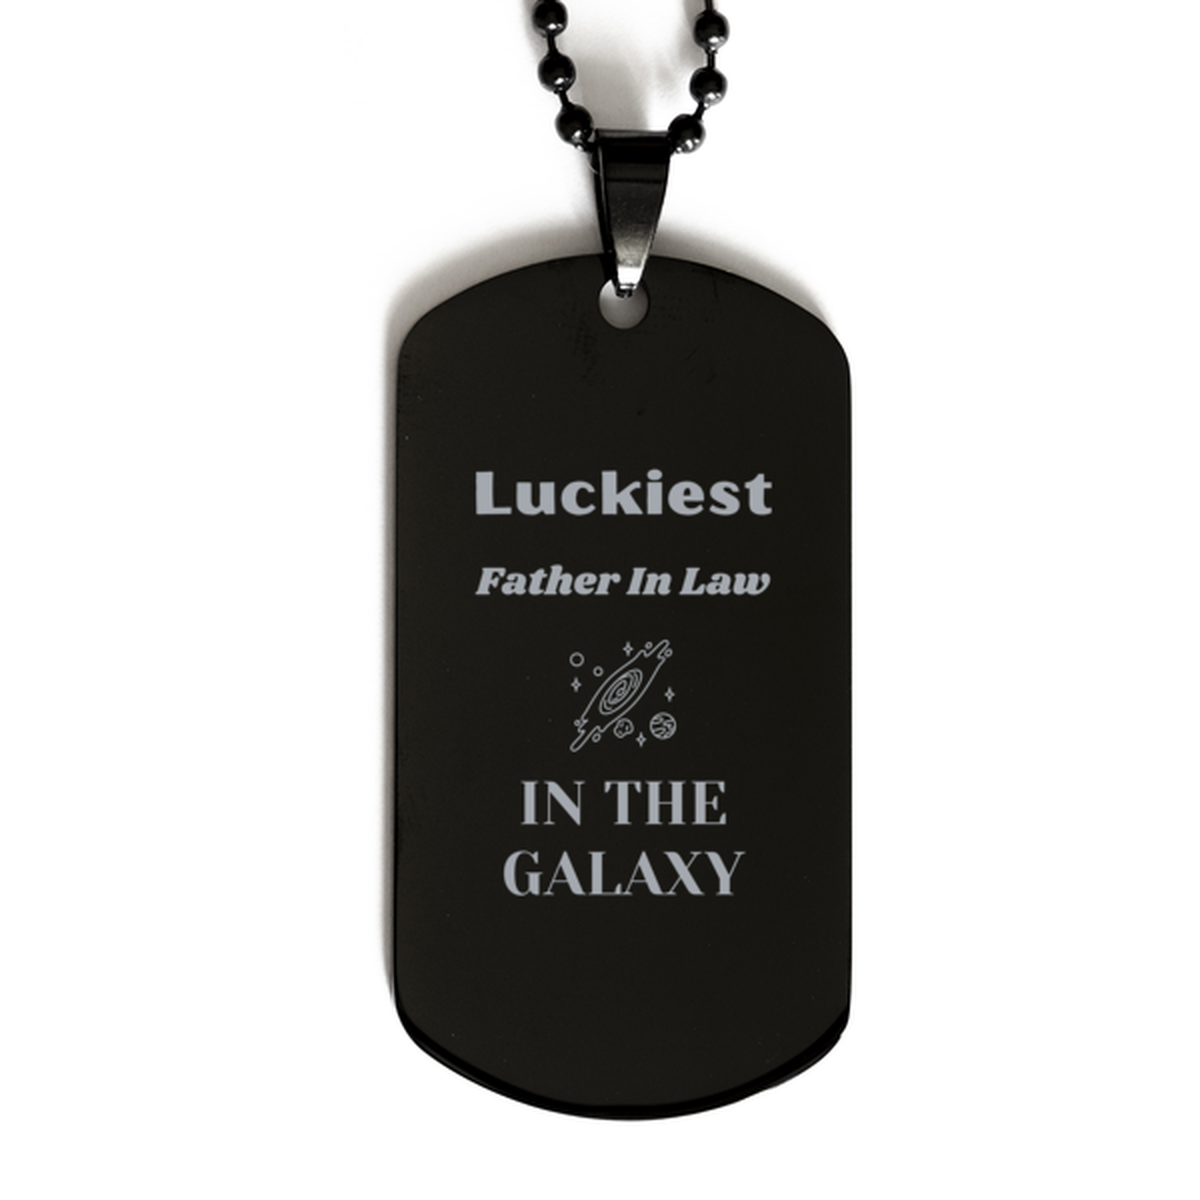 Luckiest Father In Law in the Galaxy, To My Father In Law Engraved Gifts, Christmas Father In Law Black Dog Tag Gifts, X-mas Birthday Unique Gifts For Father In Law Men Women